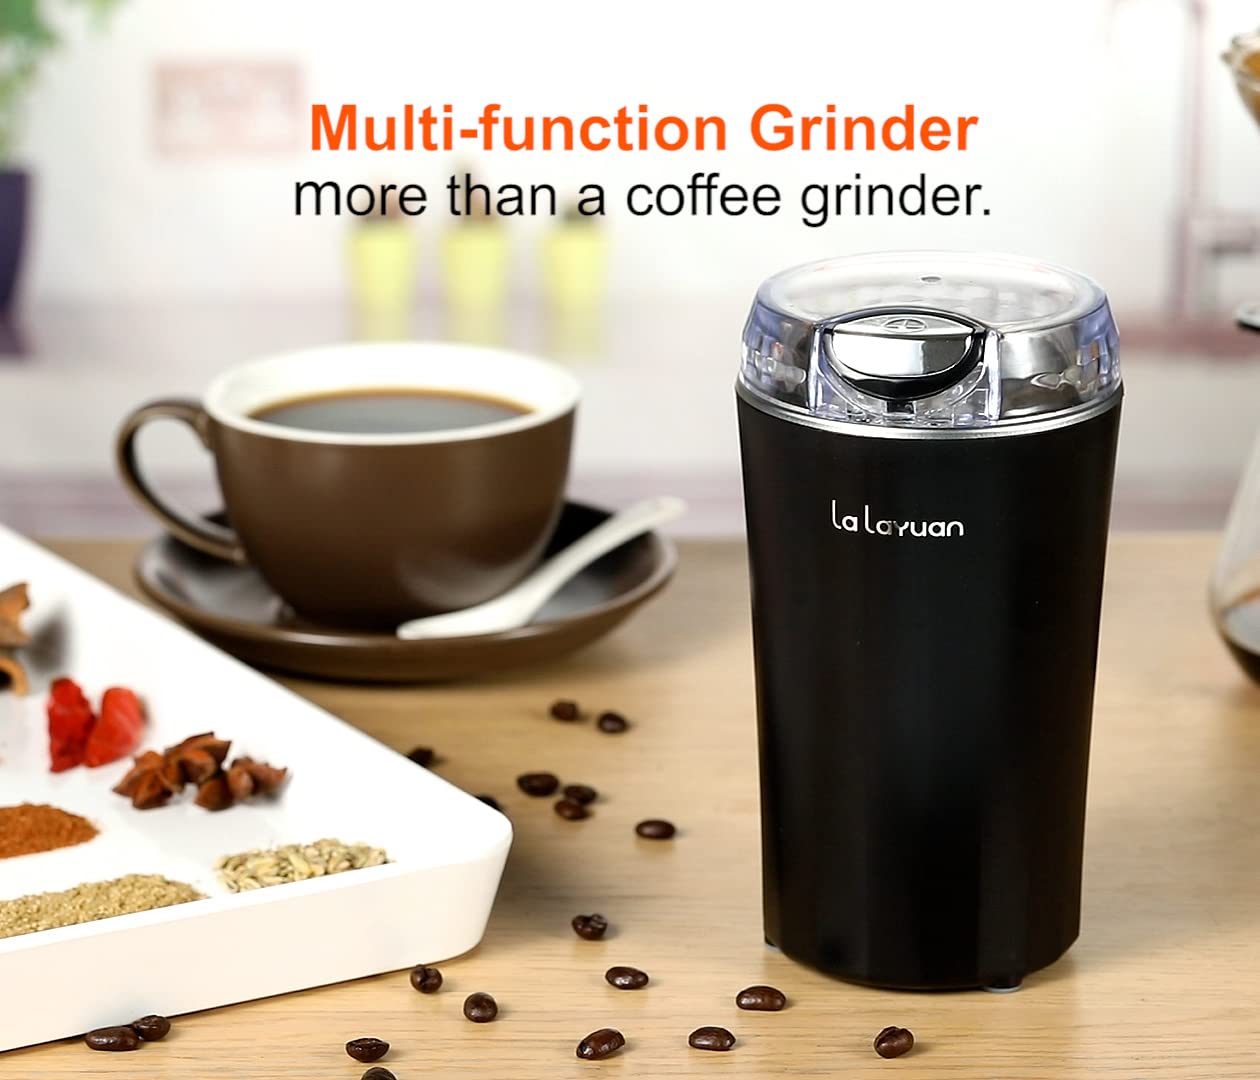 Coffee Bean Grinder, lalayuan Electric Coffee Grinder,200W Powerful Electric Spice Grinder, Herb Grinder, Espresso Grinder, One Touch Coffee Mill for Beans, Spices Herbs,Nuts, with Clean Brush Black